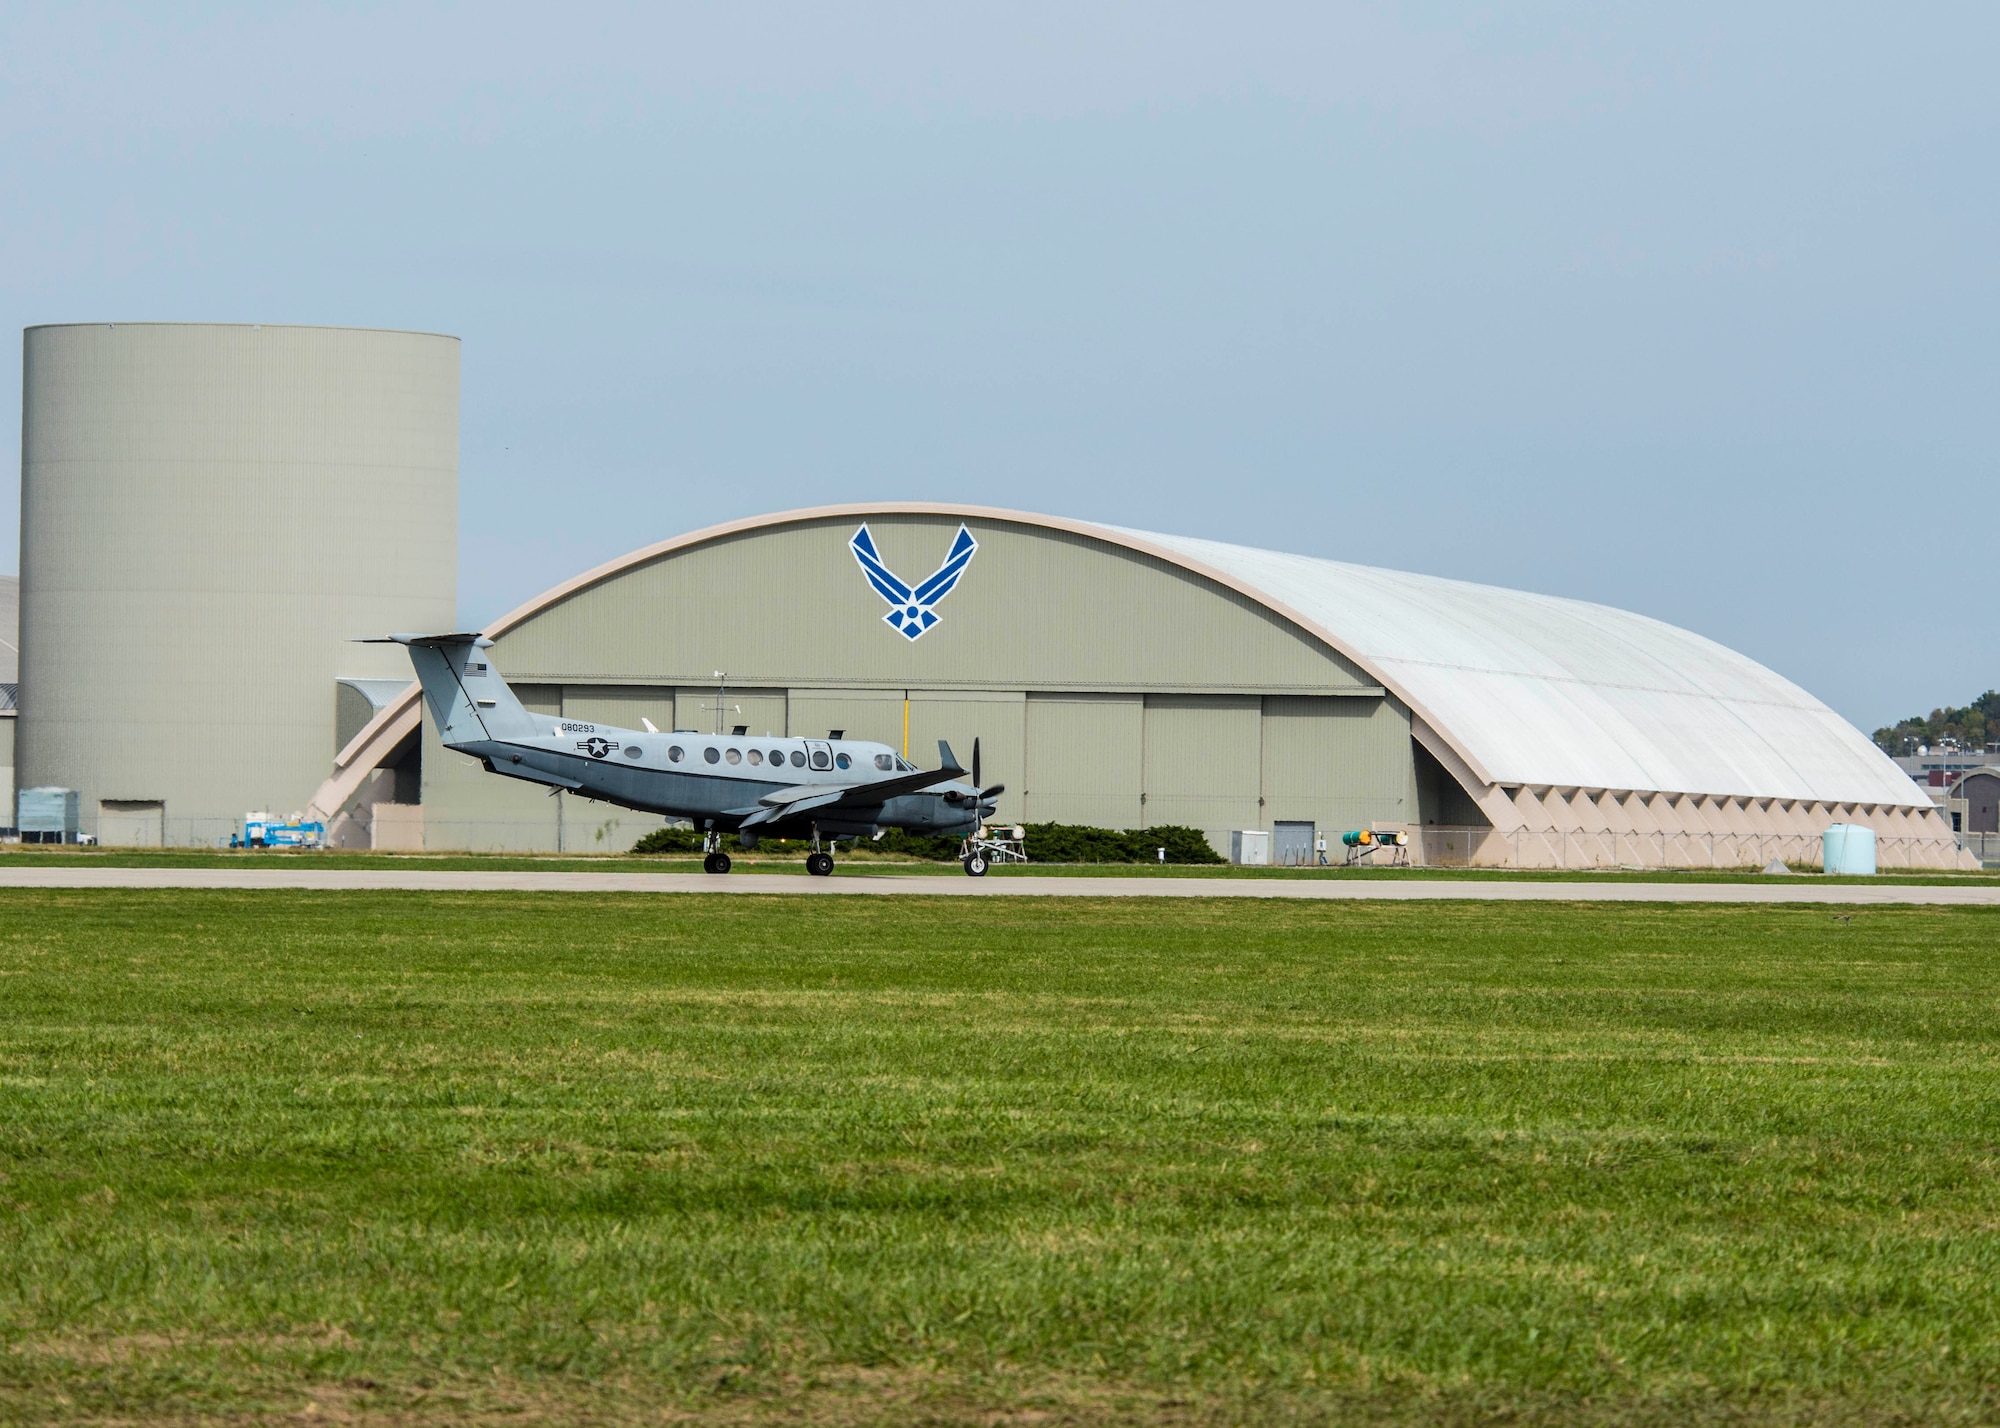 DAYTON, Ohio -- A Hawker-Beechcraft MC-12W Liberty aircraft lands at the National Museum of the U.S. Air Force on October 26, 2016. In U.S. Air Force service from 2009-2016, the unarmed Liberty collected information using a variety of sensors as an Intelligence, Surveillance, and Reconnaissance (ISR) platform.(U.S. Air Force photo by Victoria Thomas)